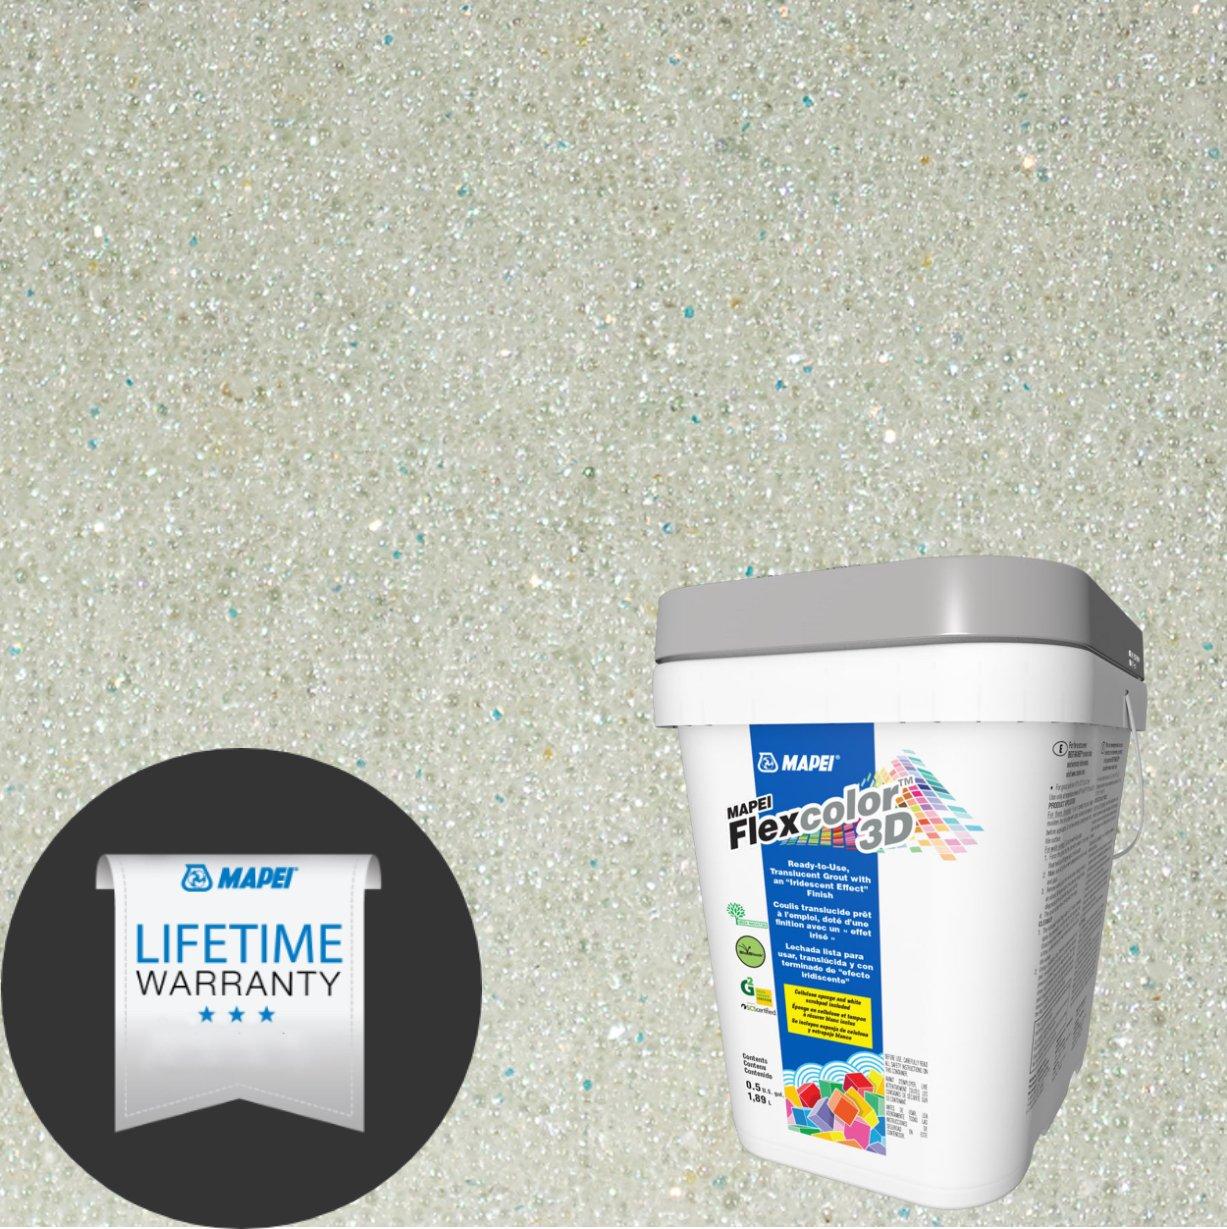 Mapei 202 Frosted Glass FlexColor 3D Pre-Mixed Grout